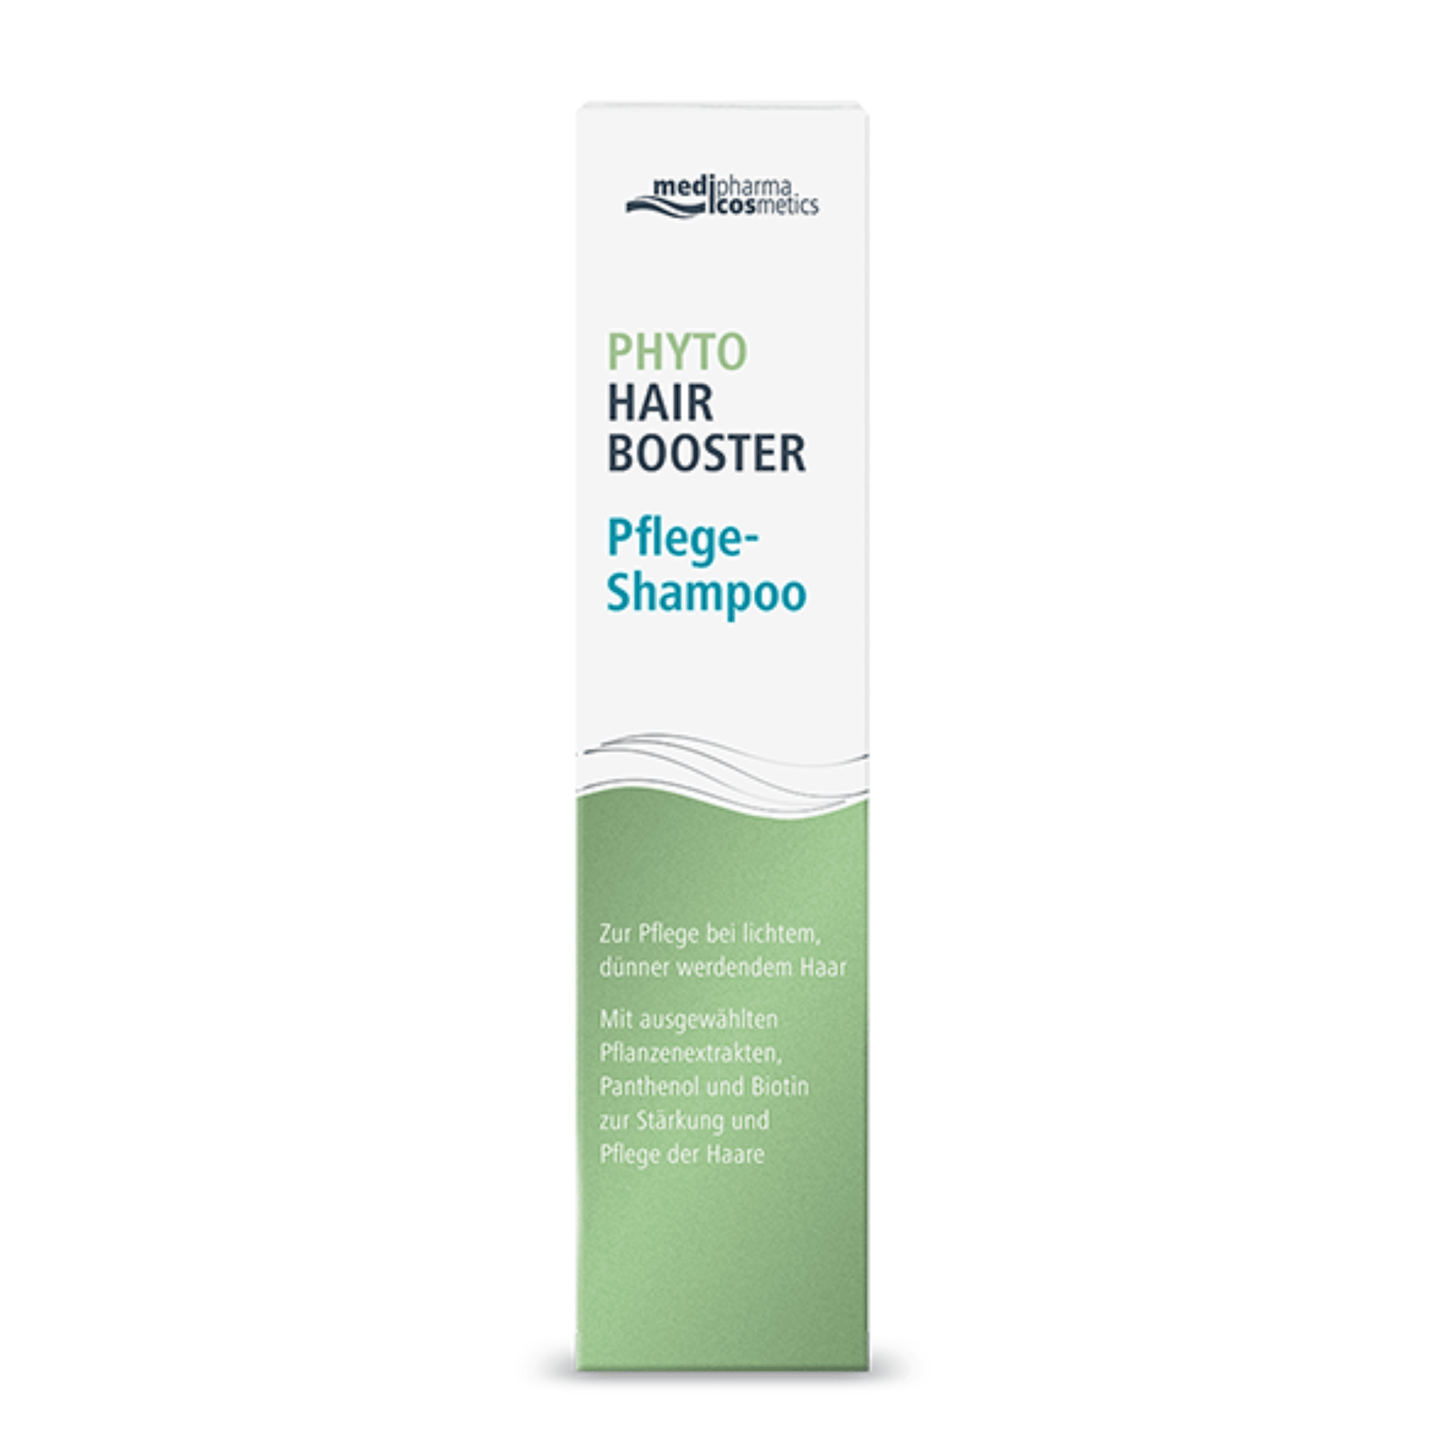 Alternate Image of Phyto Hair Booster Shampoo